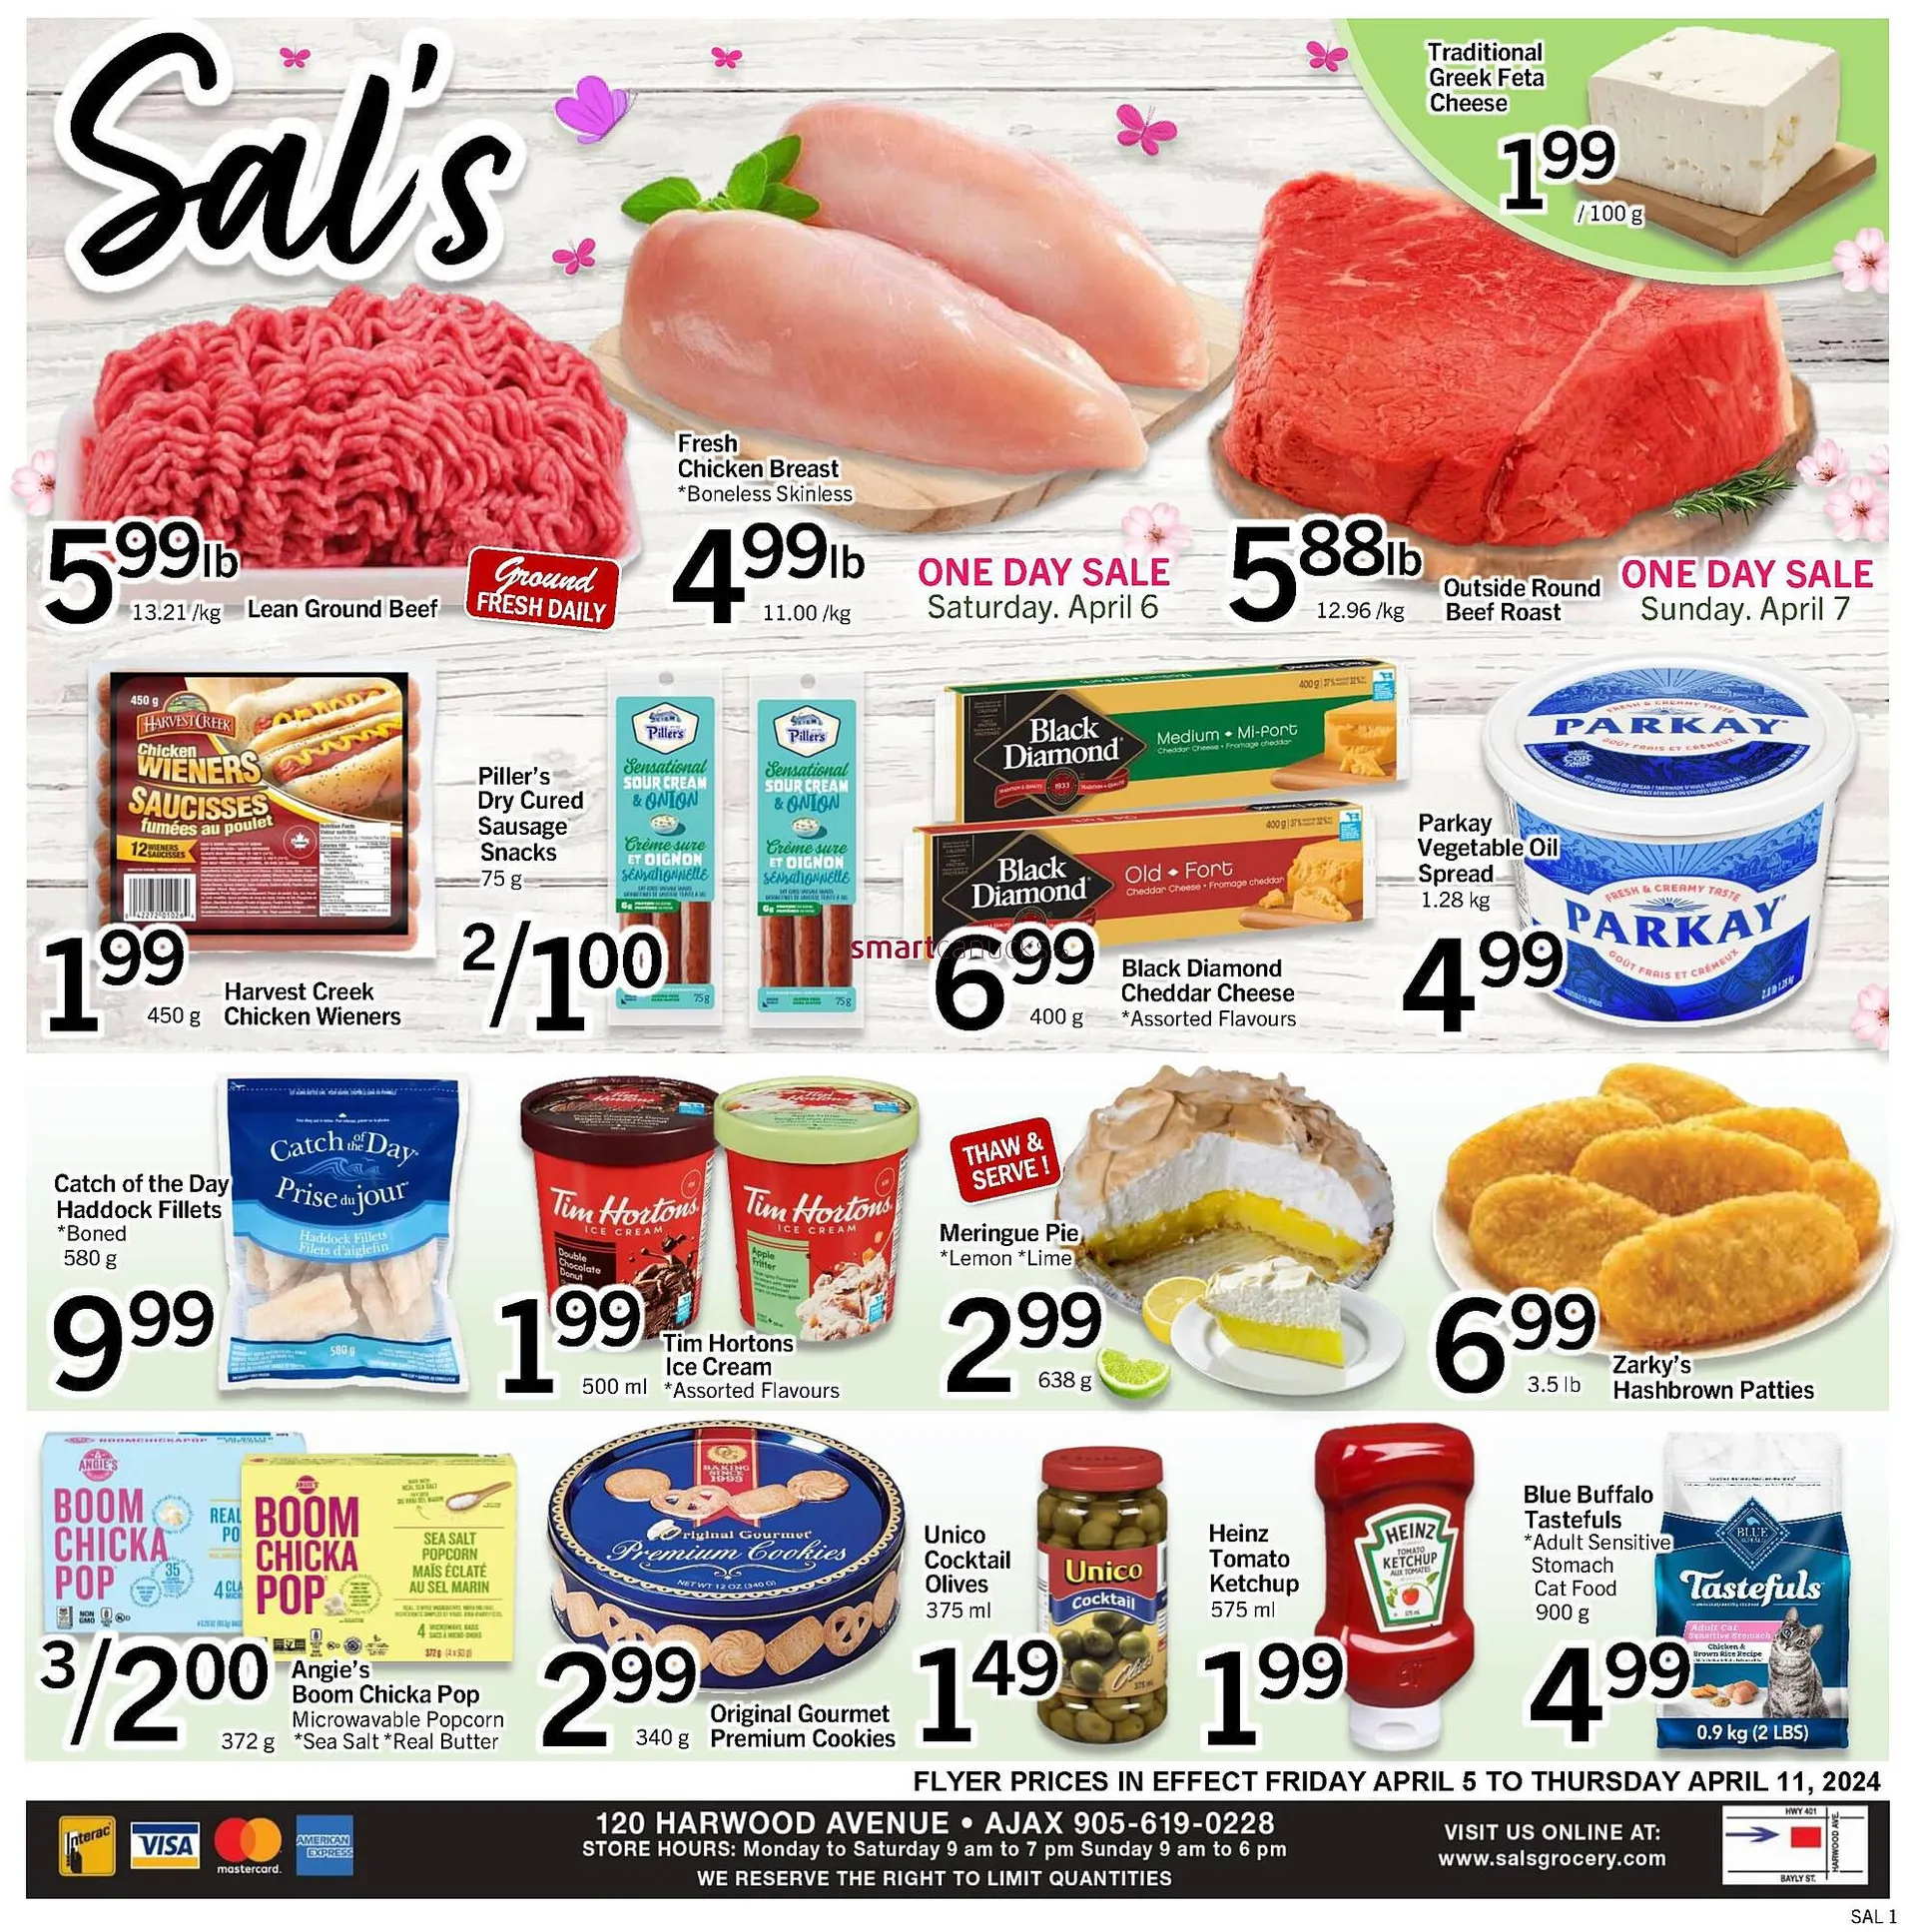 Sal's Grocery flyer from April 5 to April 11 2024 - flyer page 